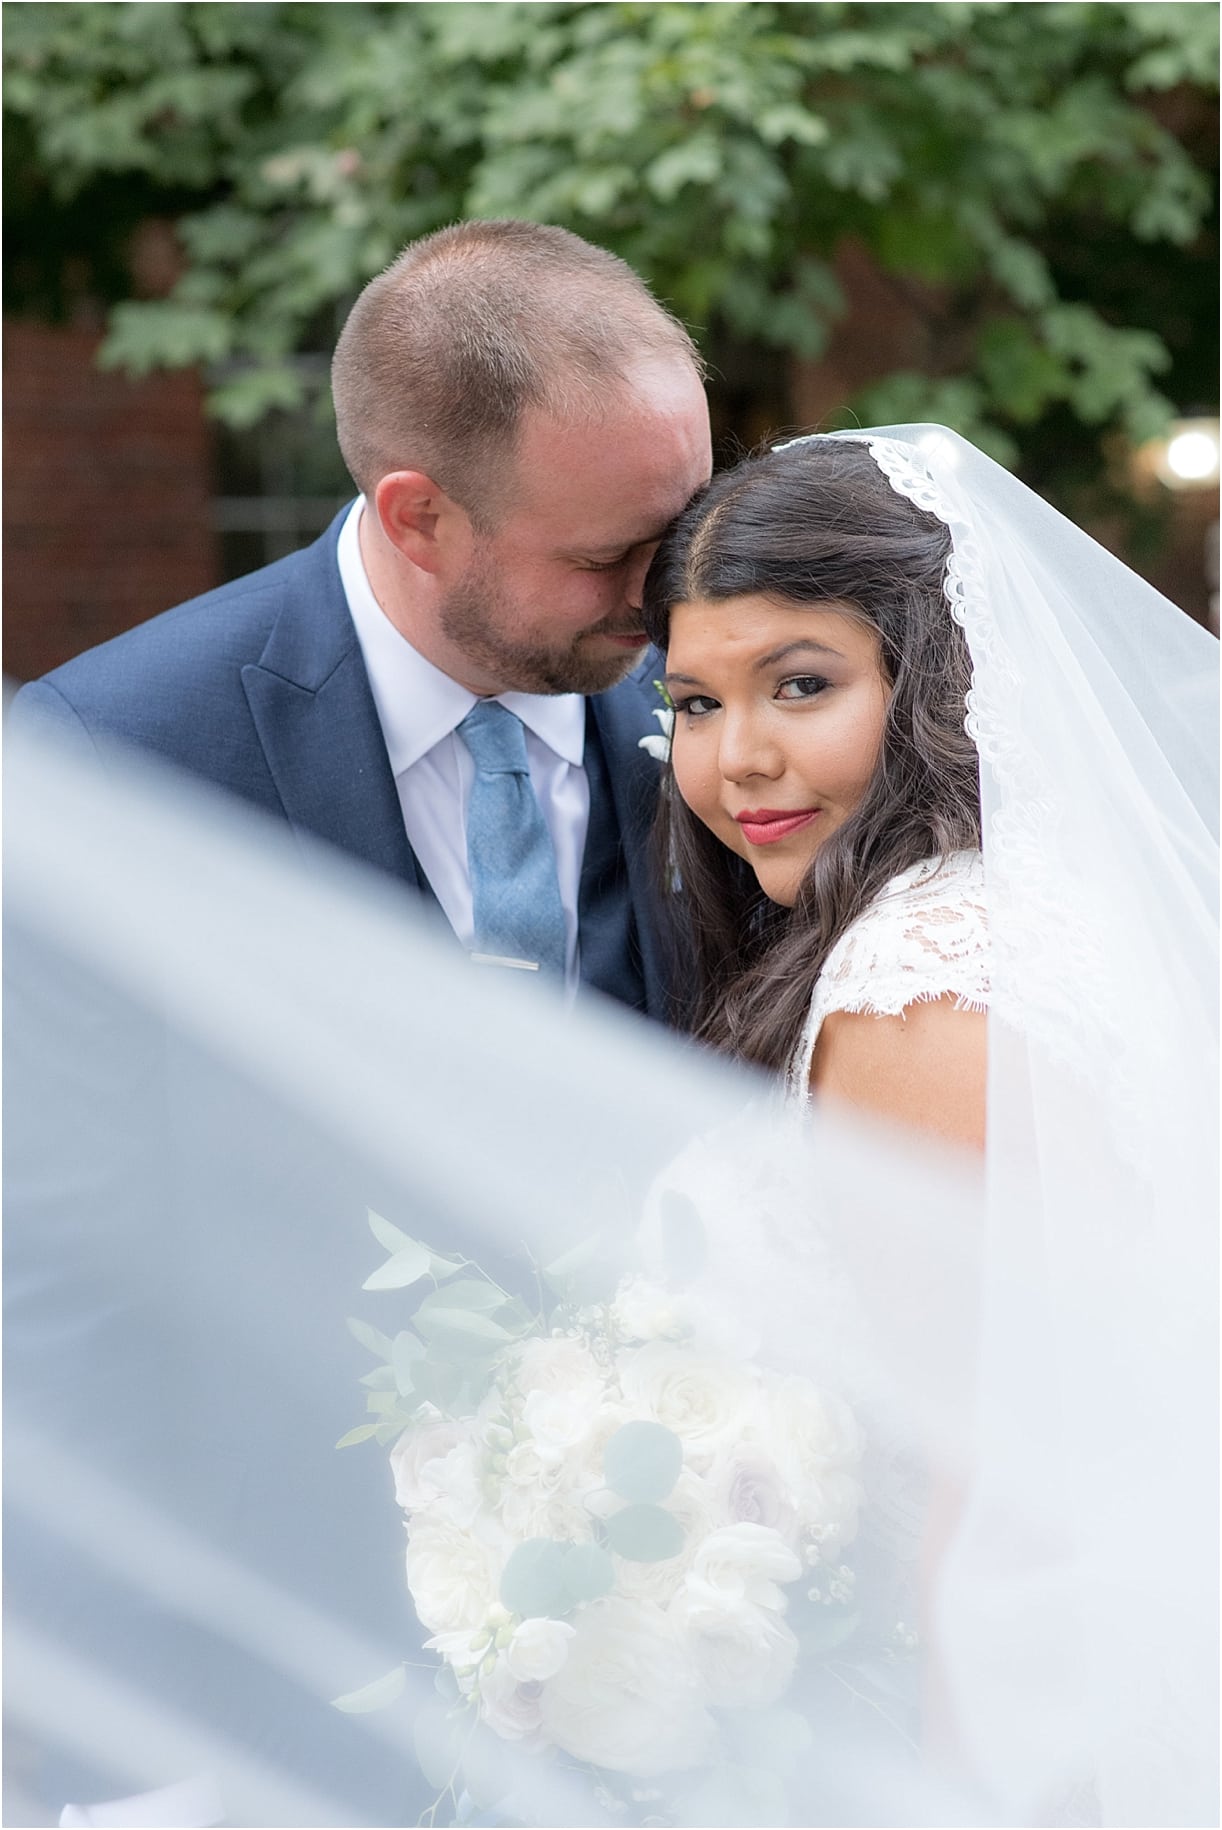 Blue Outdoor Wedding in Alexandria Virginia with Perfect Details | Hill City Bride Blog for Ideas and Inspiration Alexandria Groom Veil